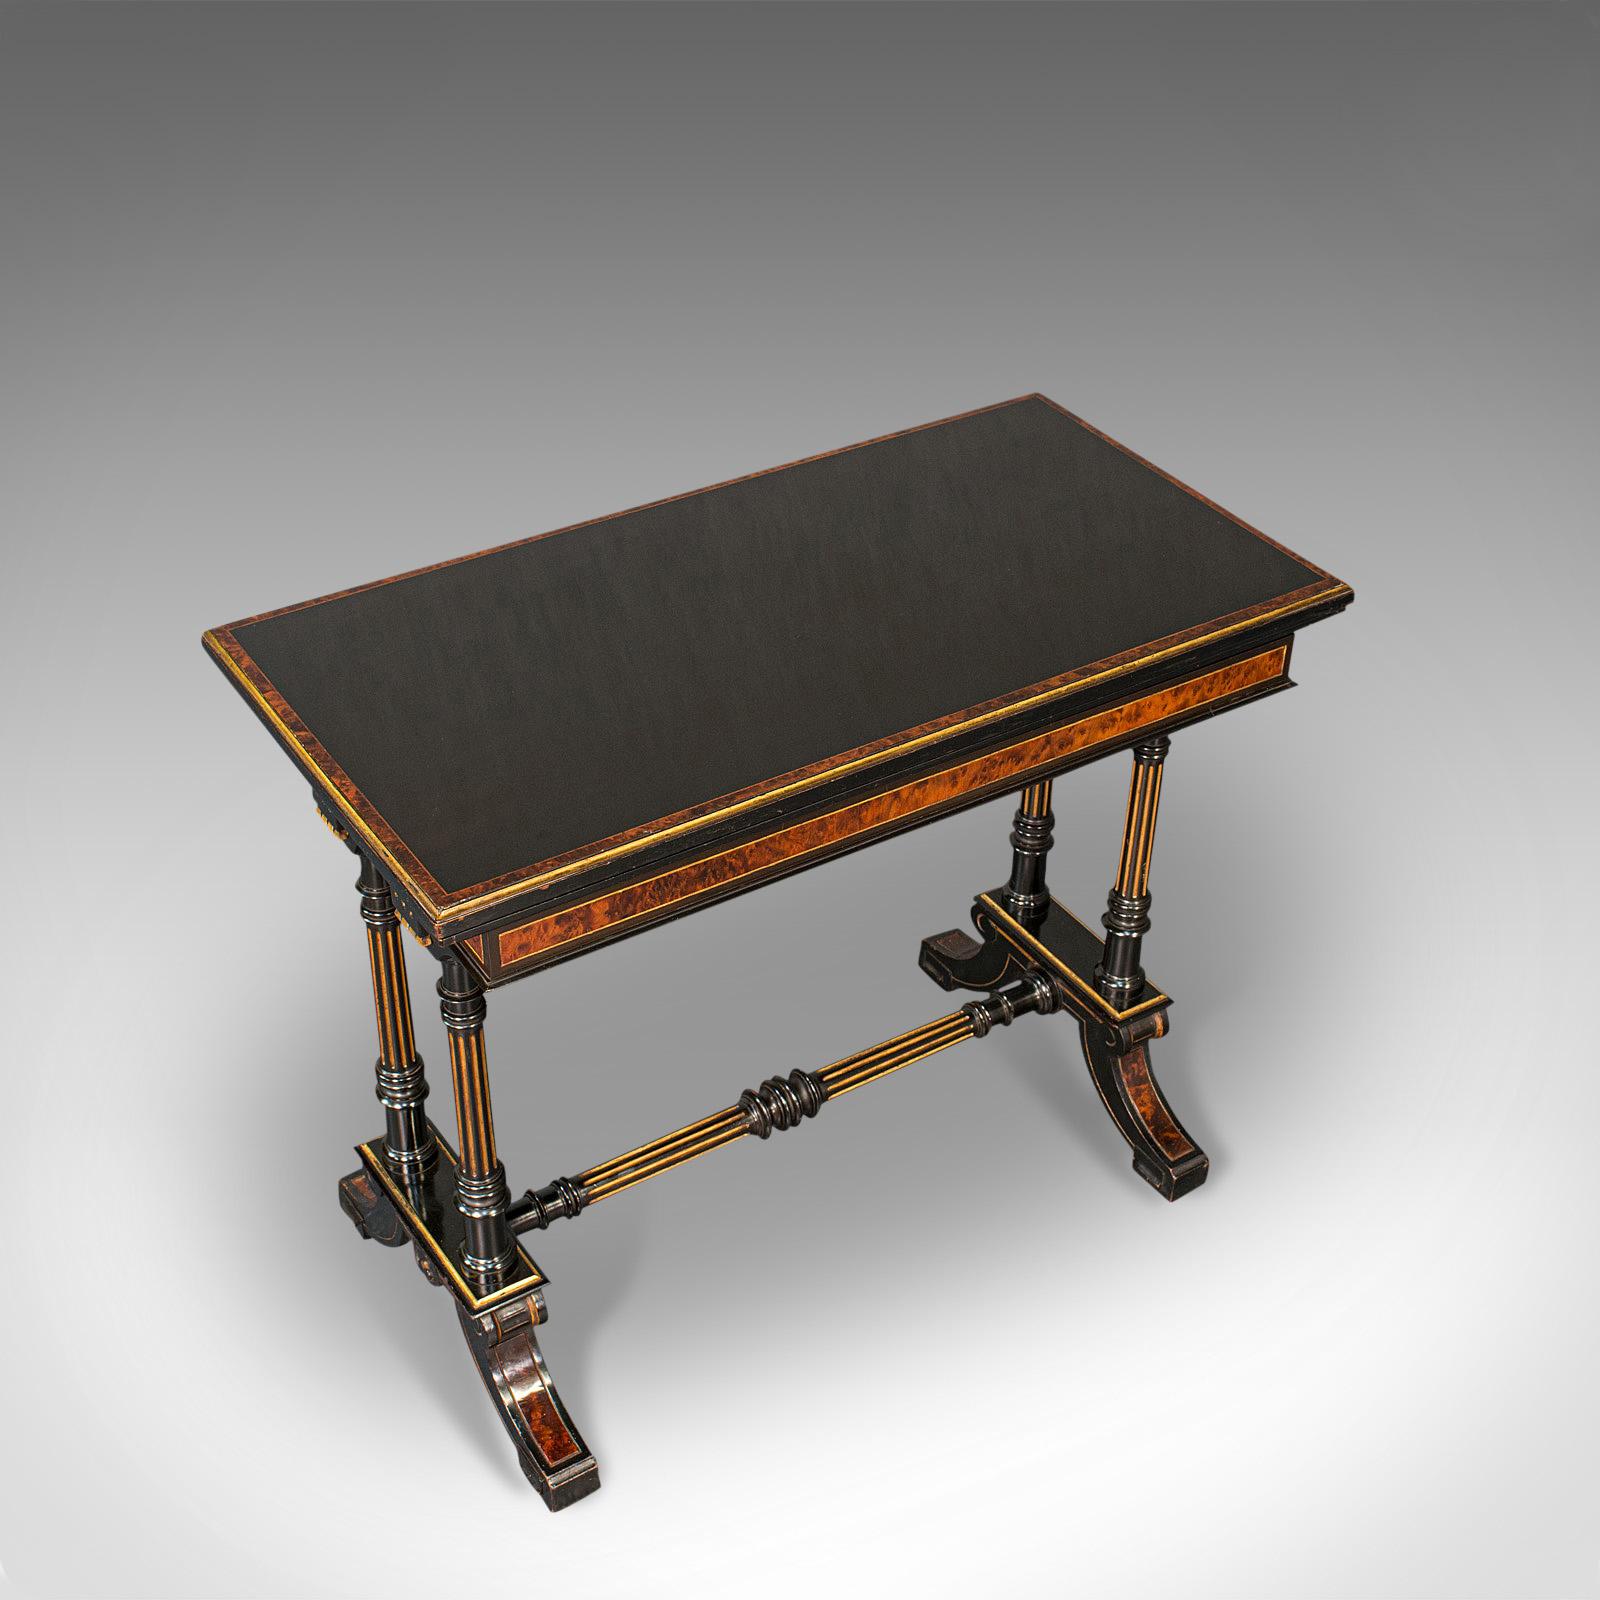 Mahogany Antique Card Table, Ebonised, Games, Gillow & Co, Aesthetic Period, Circa 1875